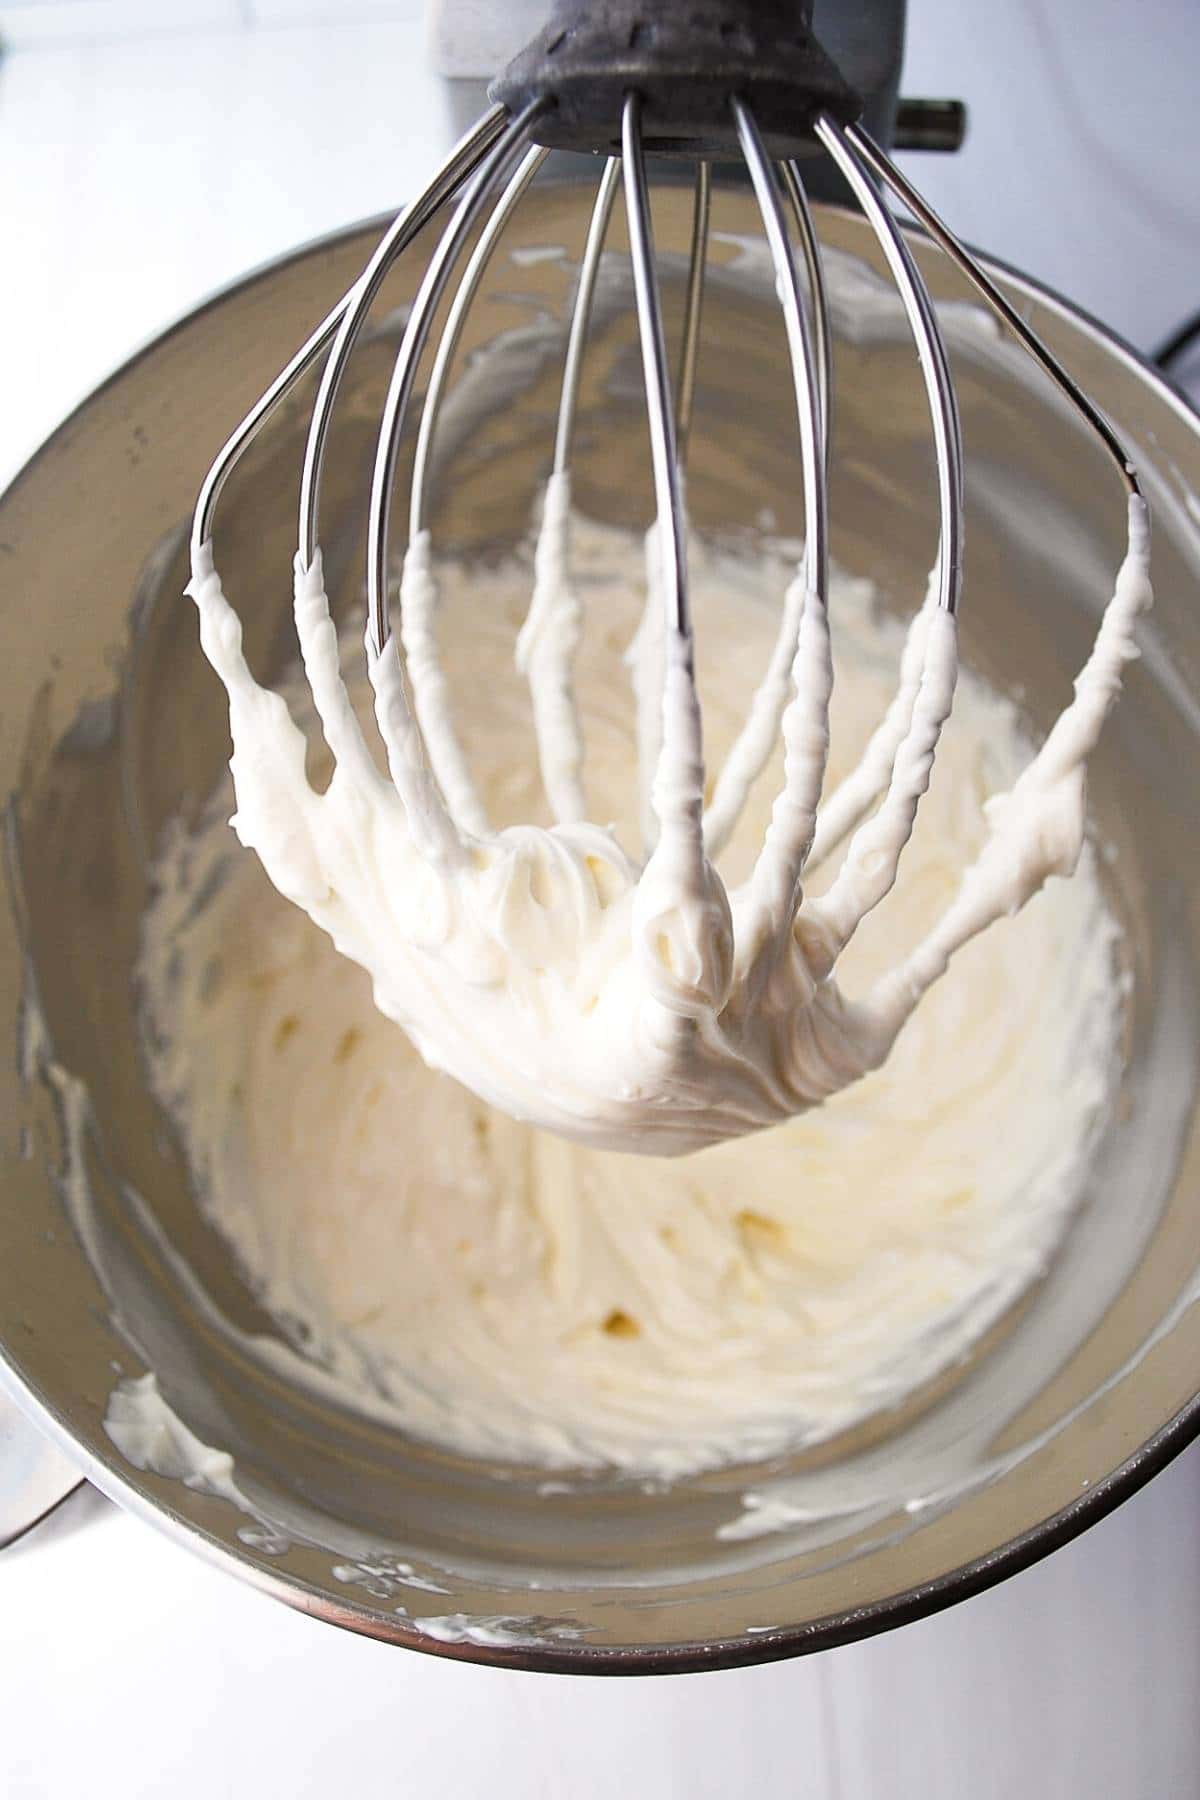 cream cheese dressing for grape salad in a stand mixer